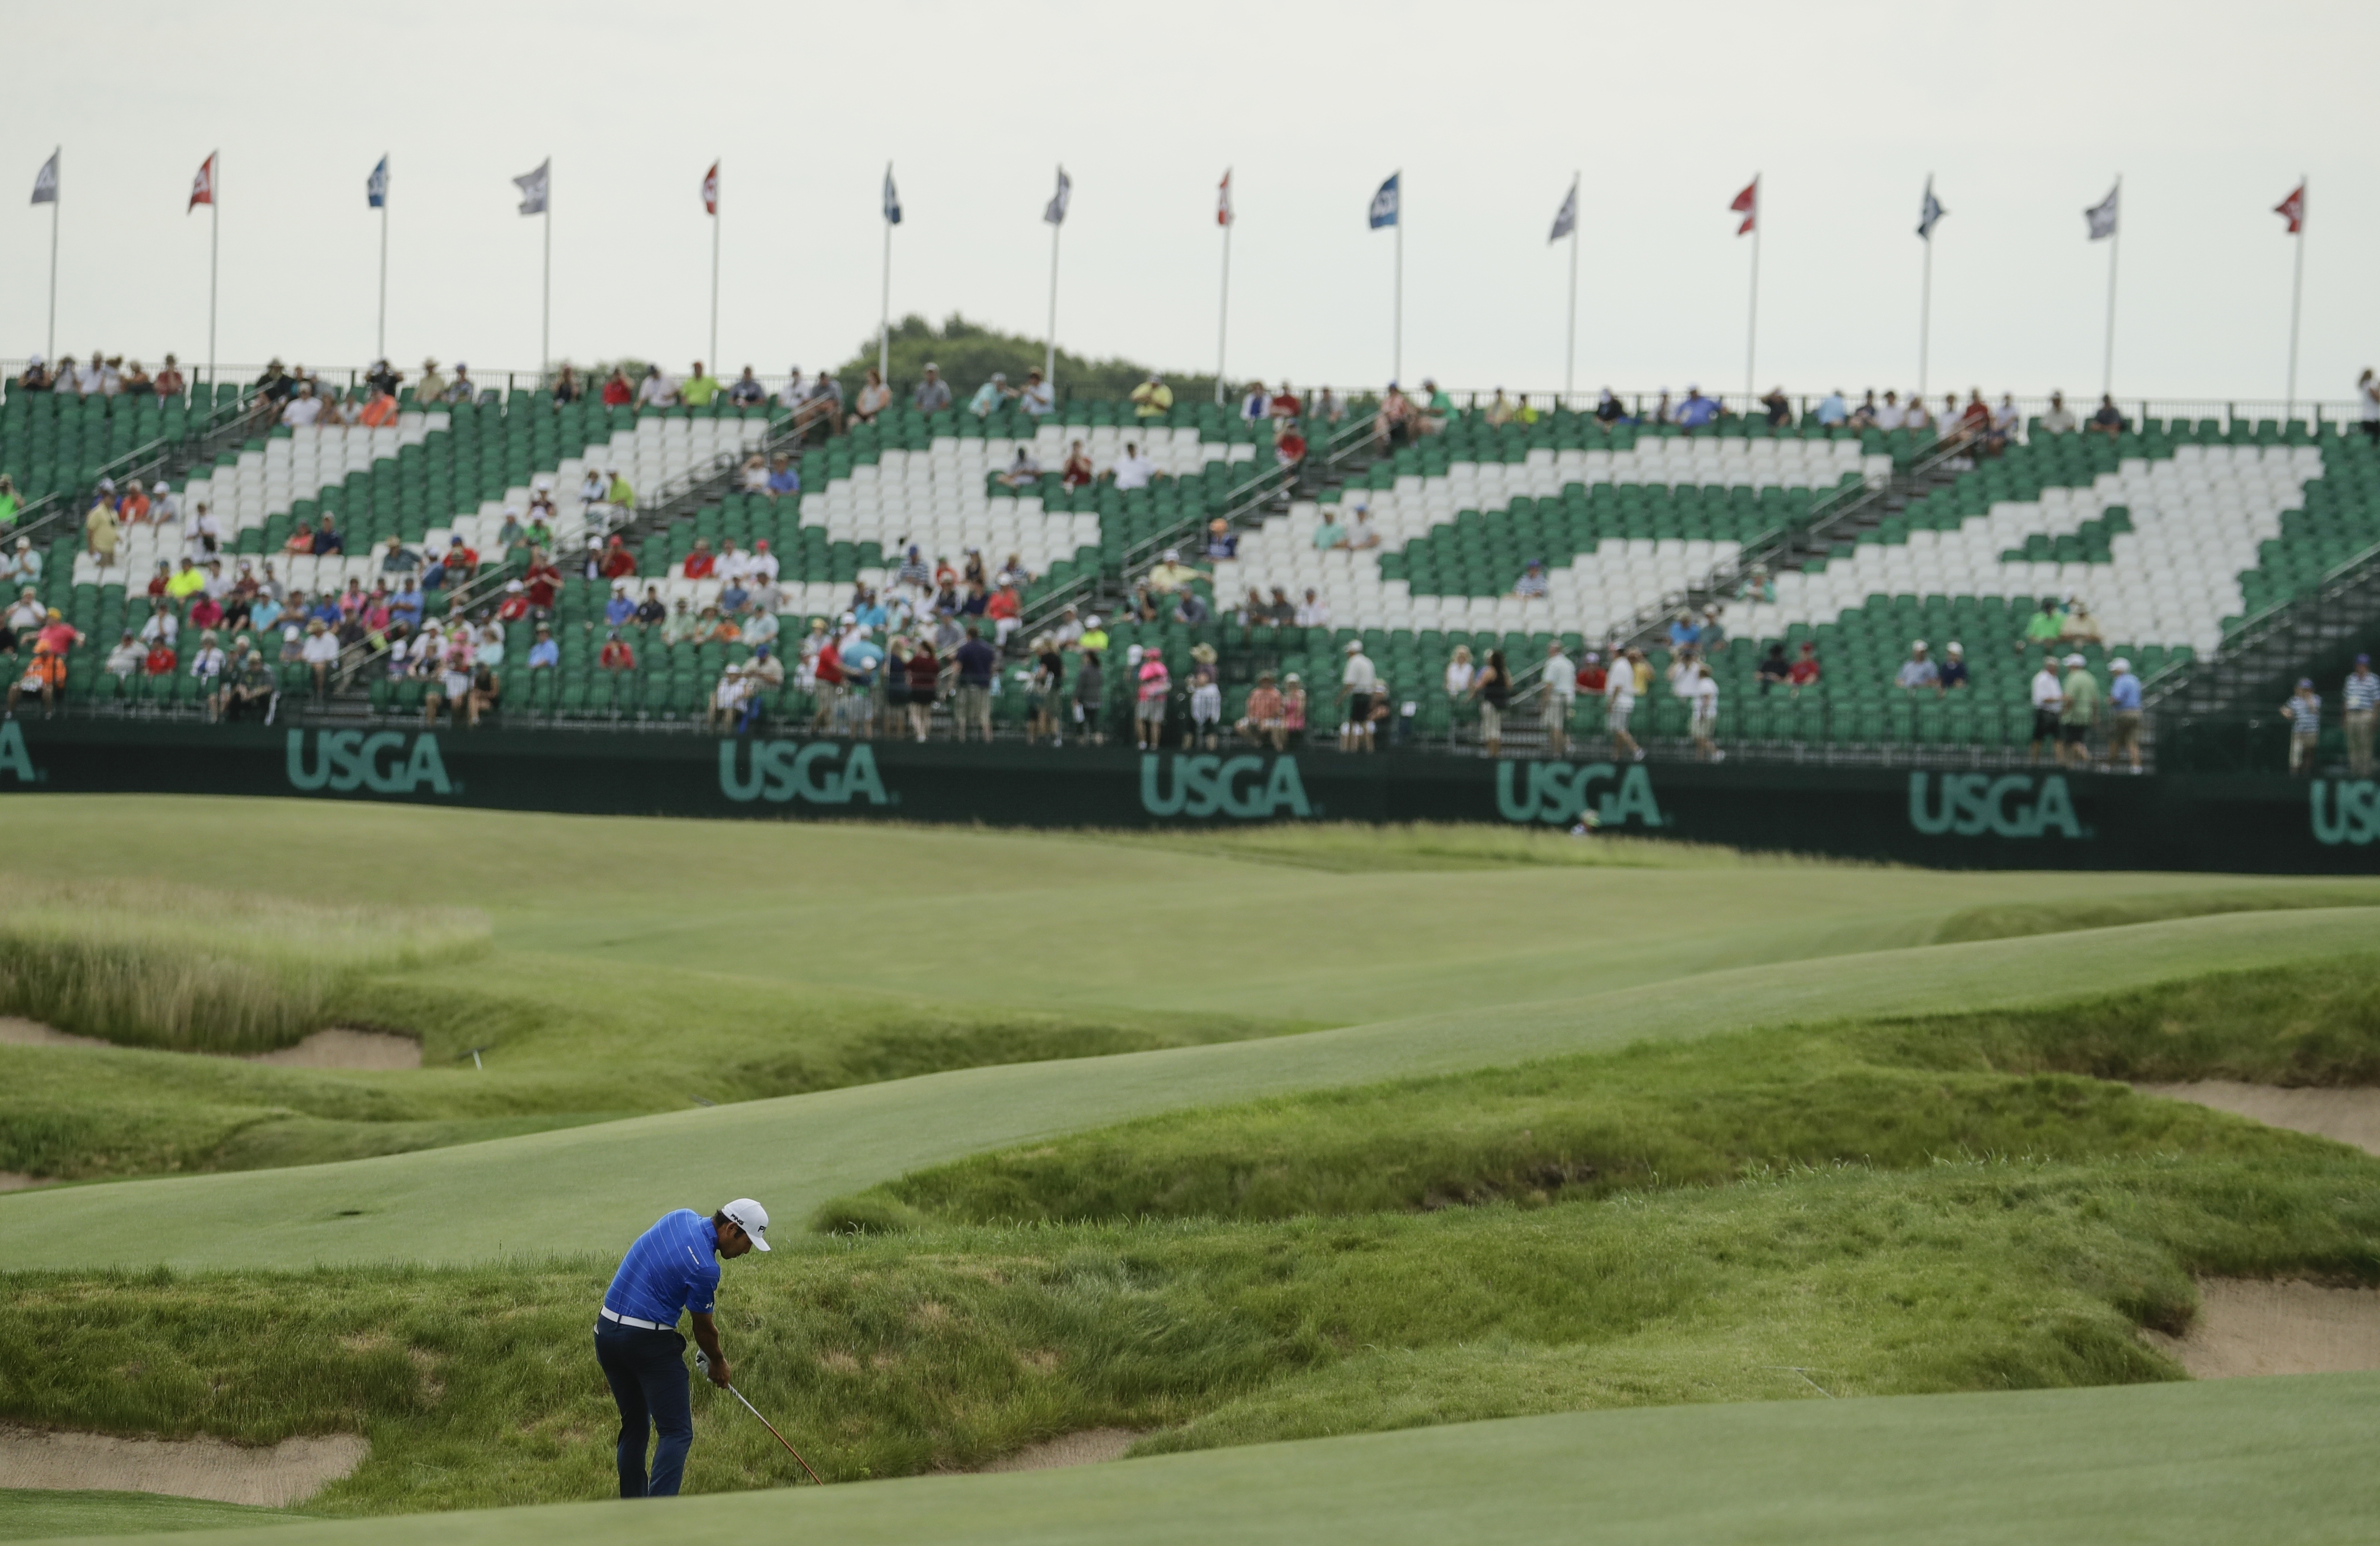 Traces of e.coli were found at a hydration station at the U.S. Open (AP)